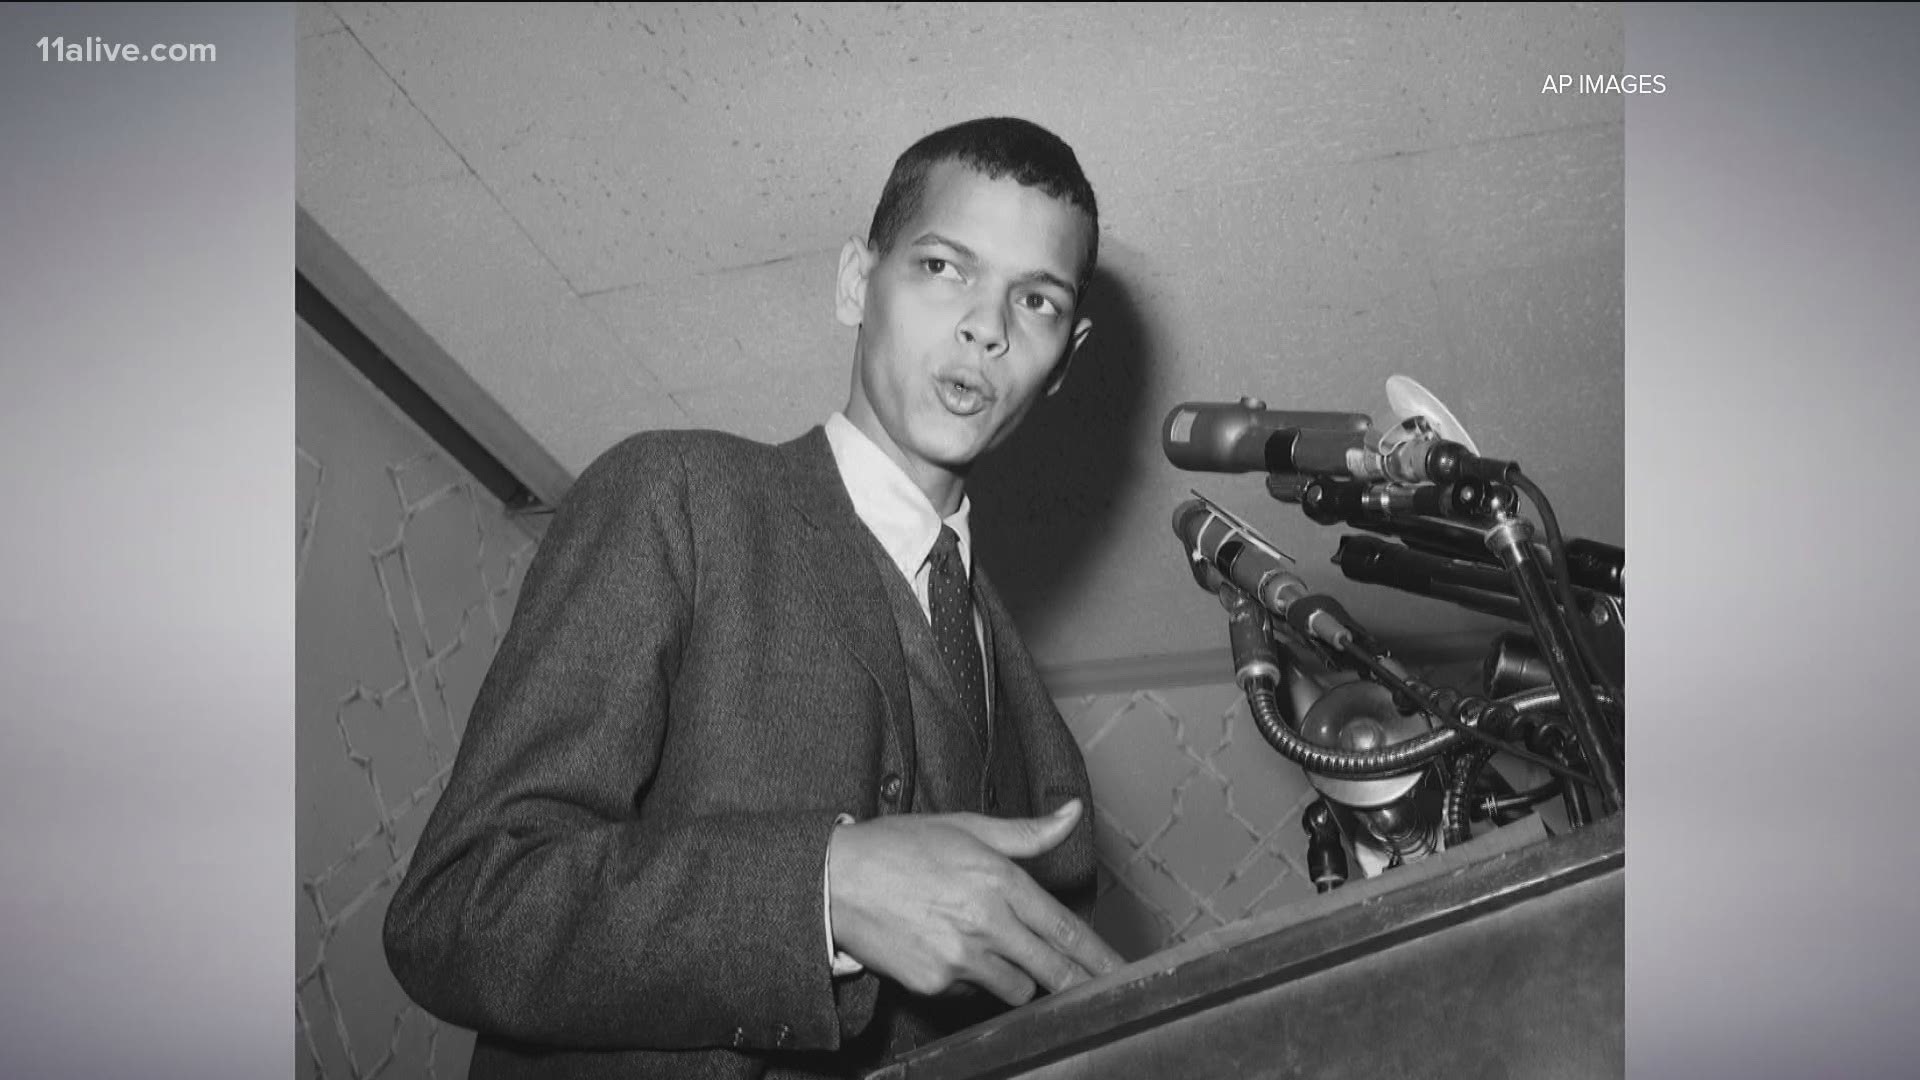 When Trump's impeachment trial convenes, he will, in effect, call on the late Atlanta civil rights leader Julian Bond as a defense witness.